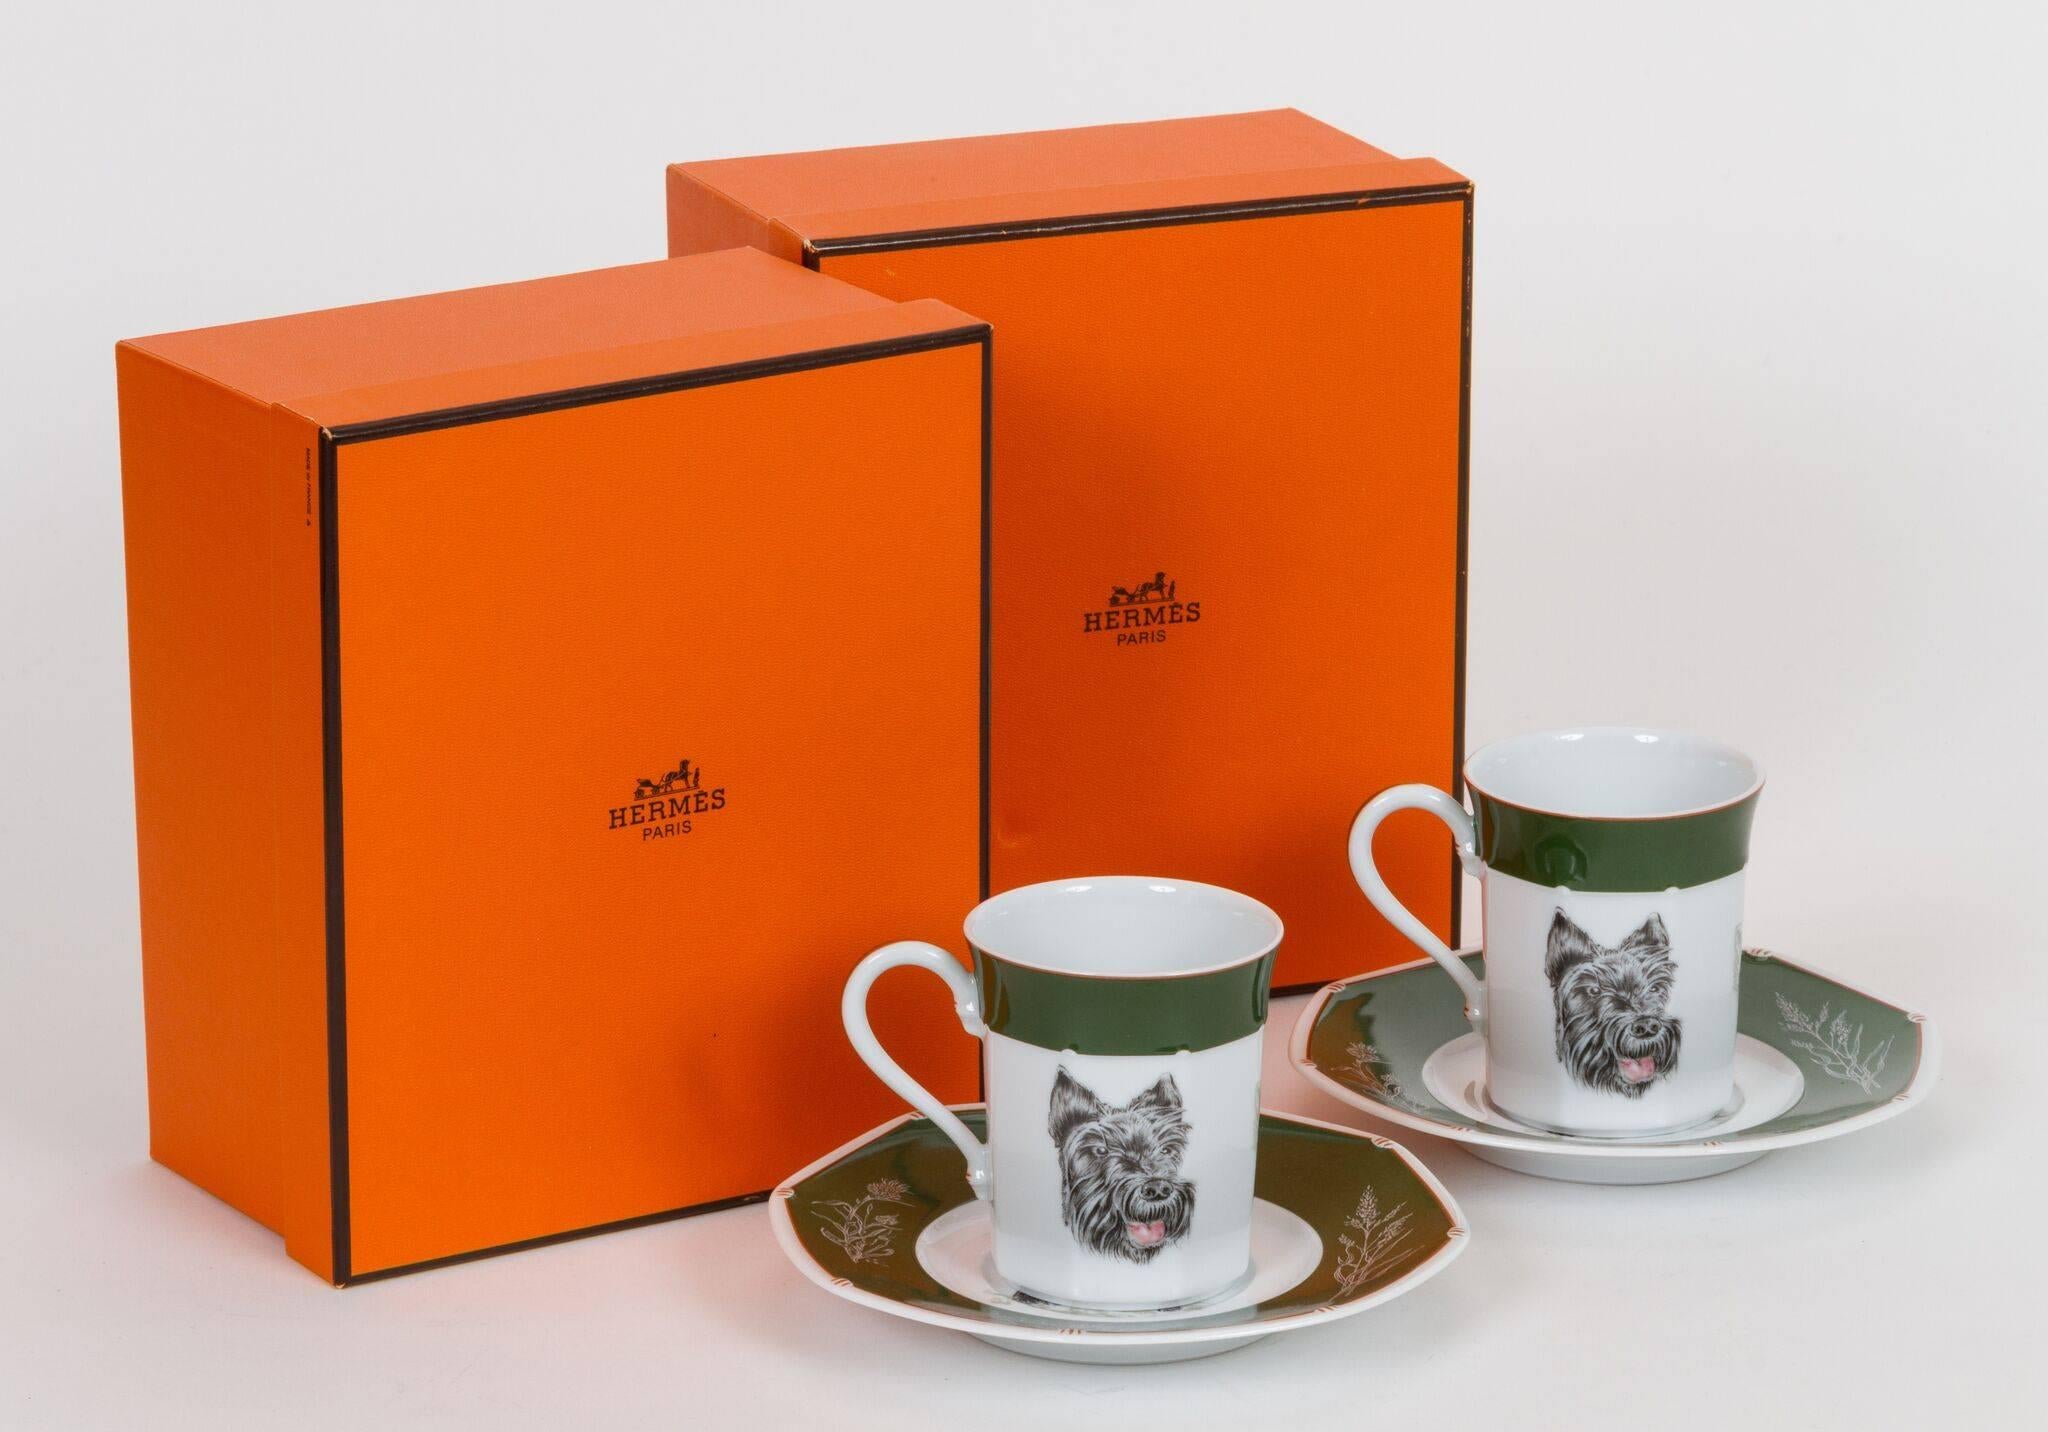 Set of two Hermès porcelain cups and saucers with Scottish Terrier design. Comes in original individual boxes and gift bag. Saucers, 6